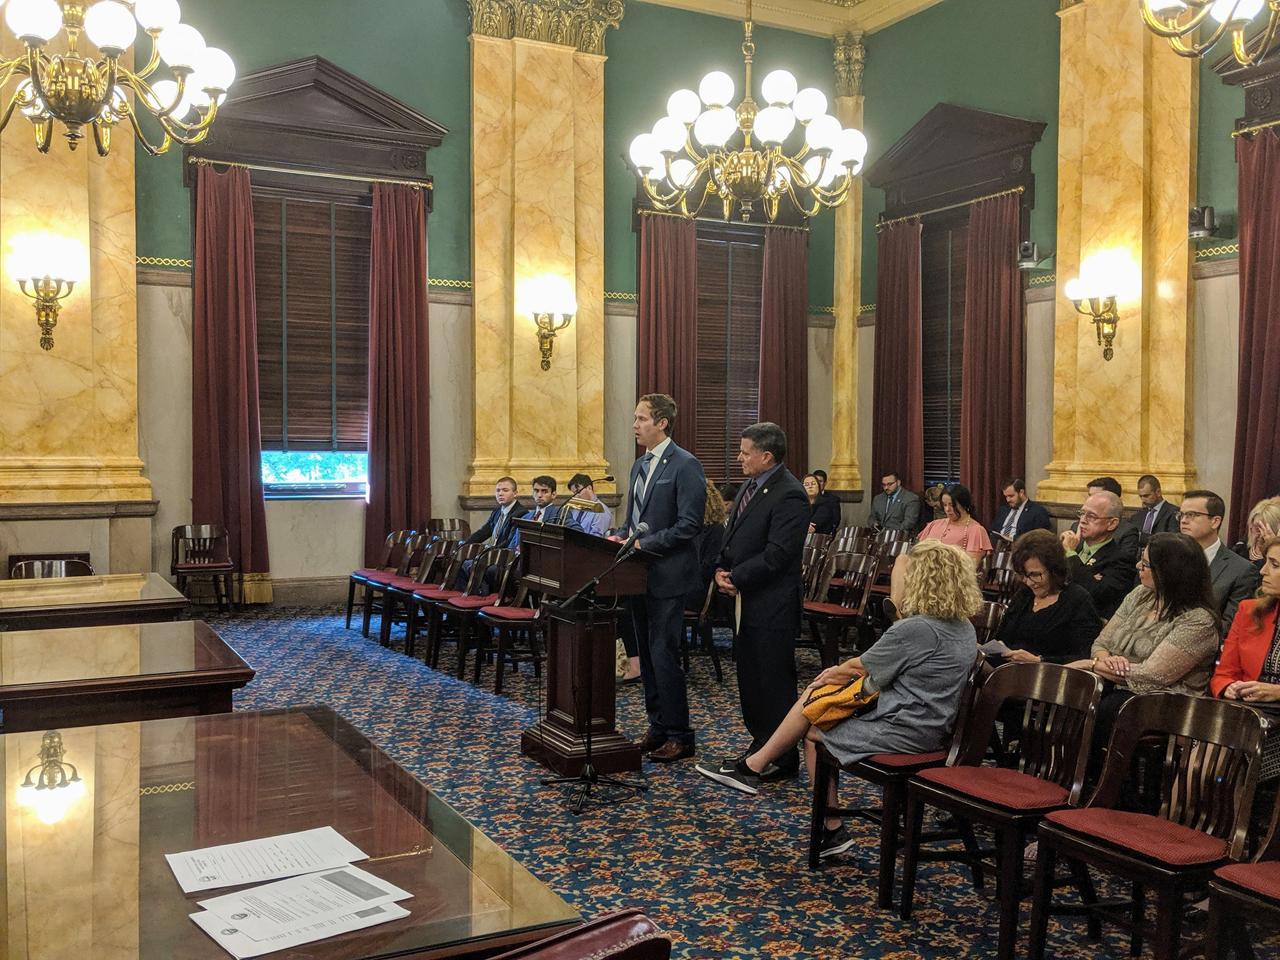 Rep. Weinstein testifies before the Senate on his bipartisan bill to issue occupational licenses for military families in Ohio alongside joint sponsor Rick Perales (R-Beavercreek)